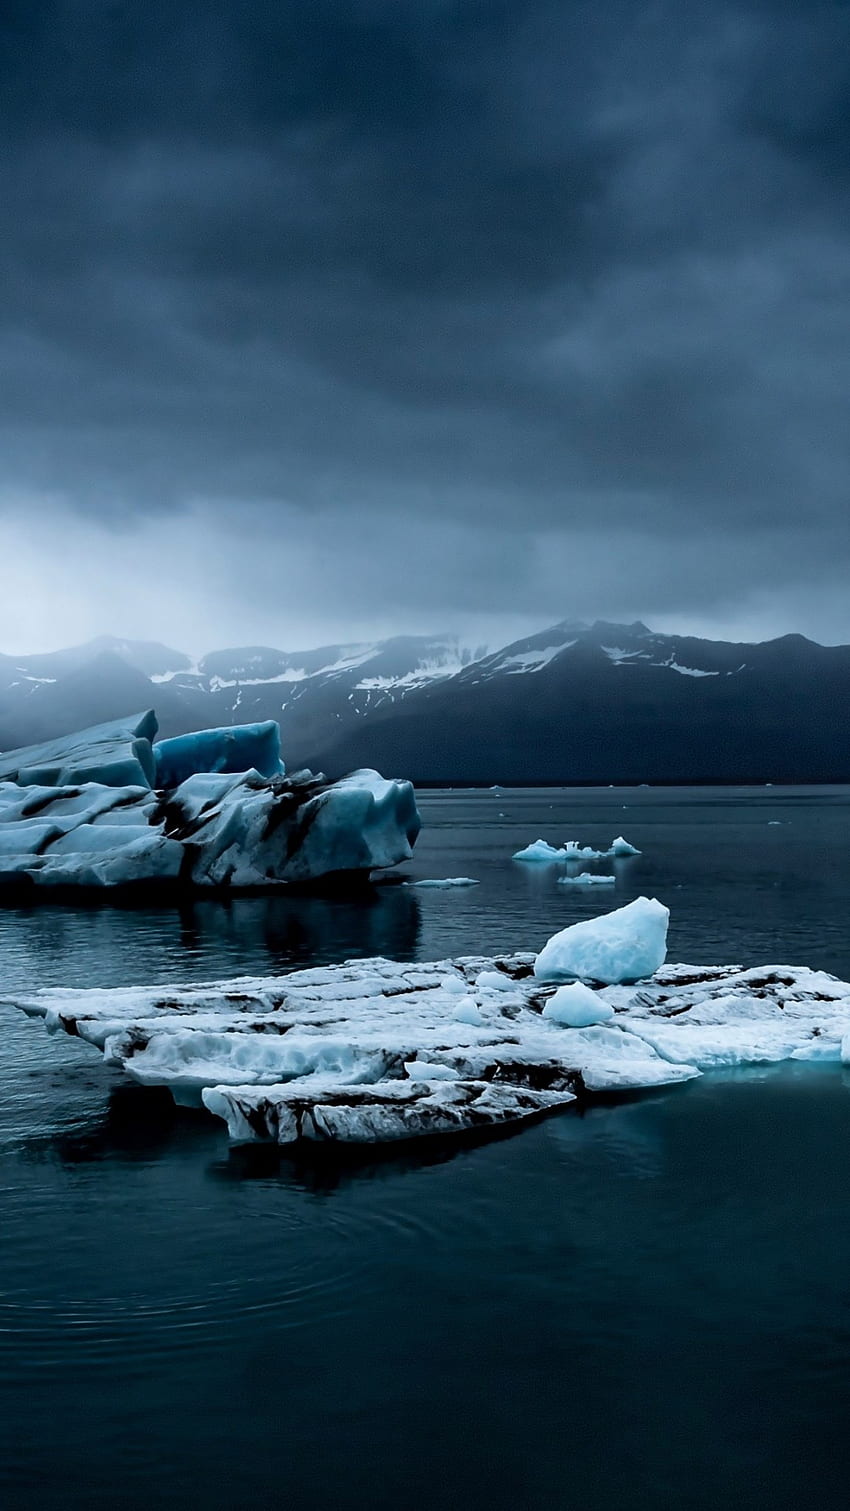 Iceland, Iceberg, Dark Clouds for iPhone 8, iPhone 7 Plus, iPhone 6+, Sony Xperia Z, HTC One HD phone wallpaper